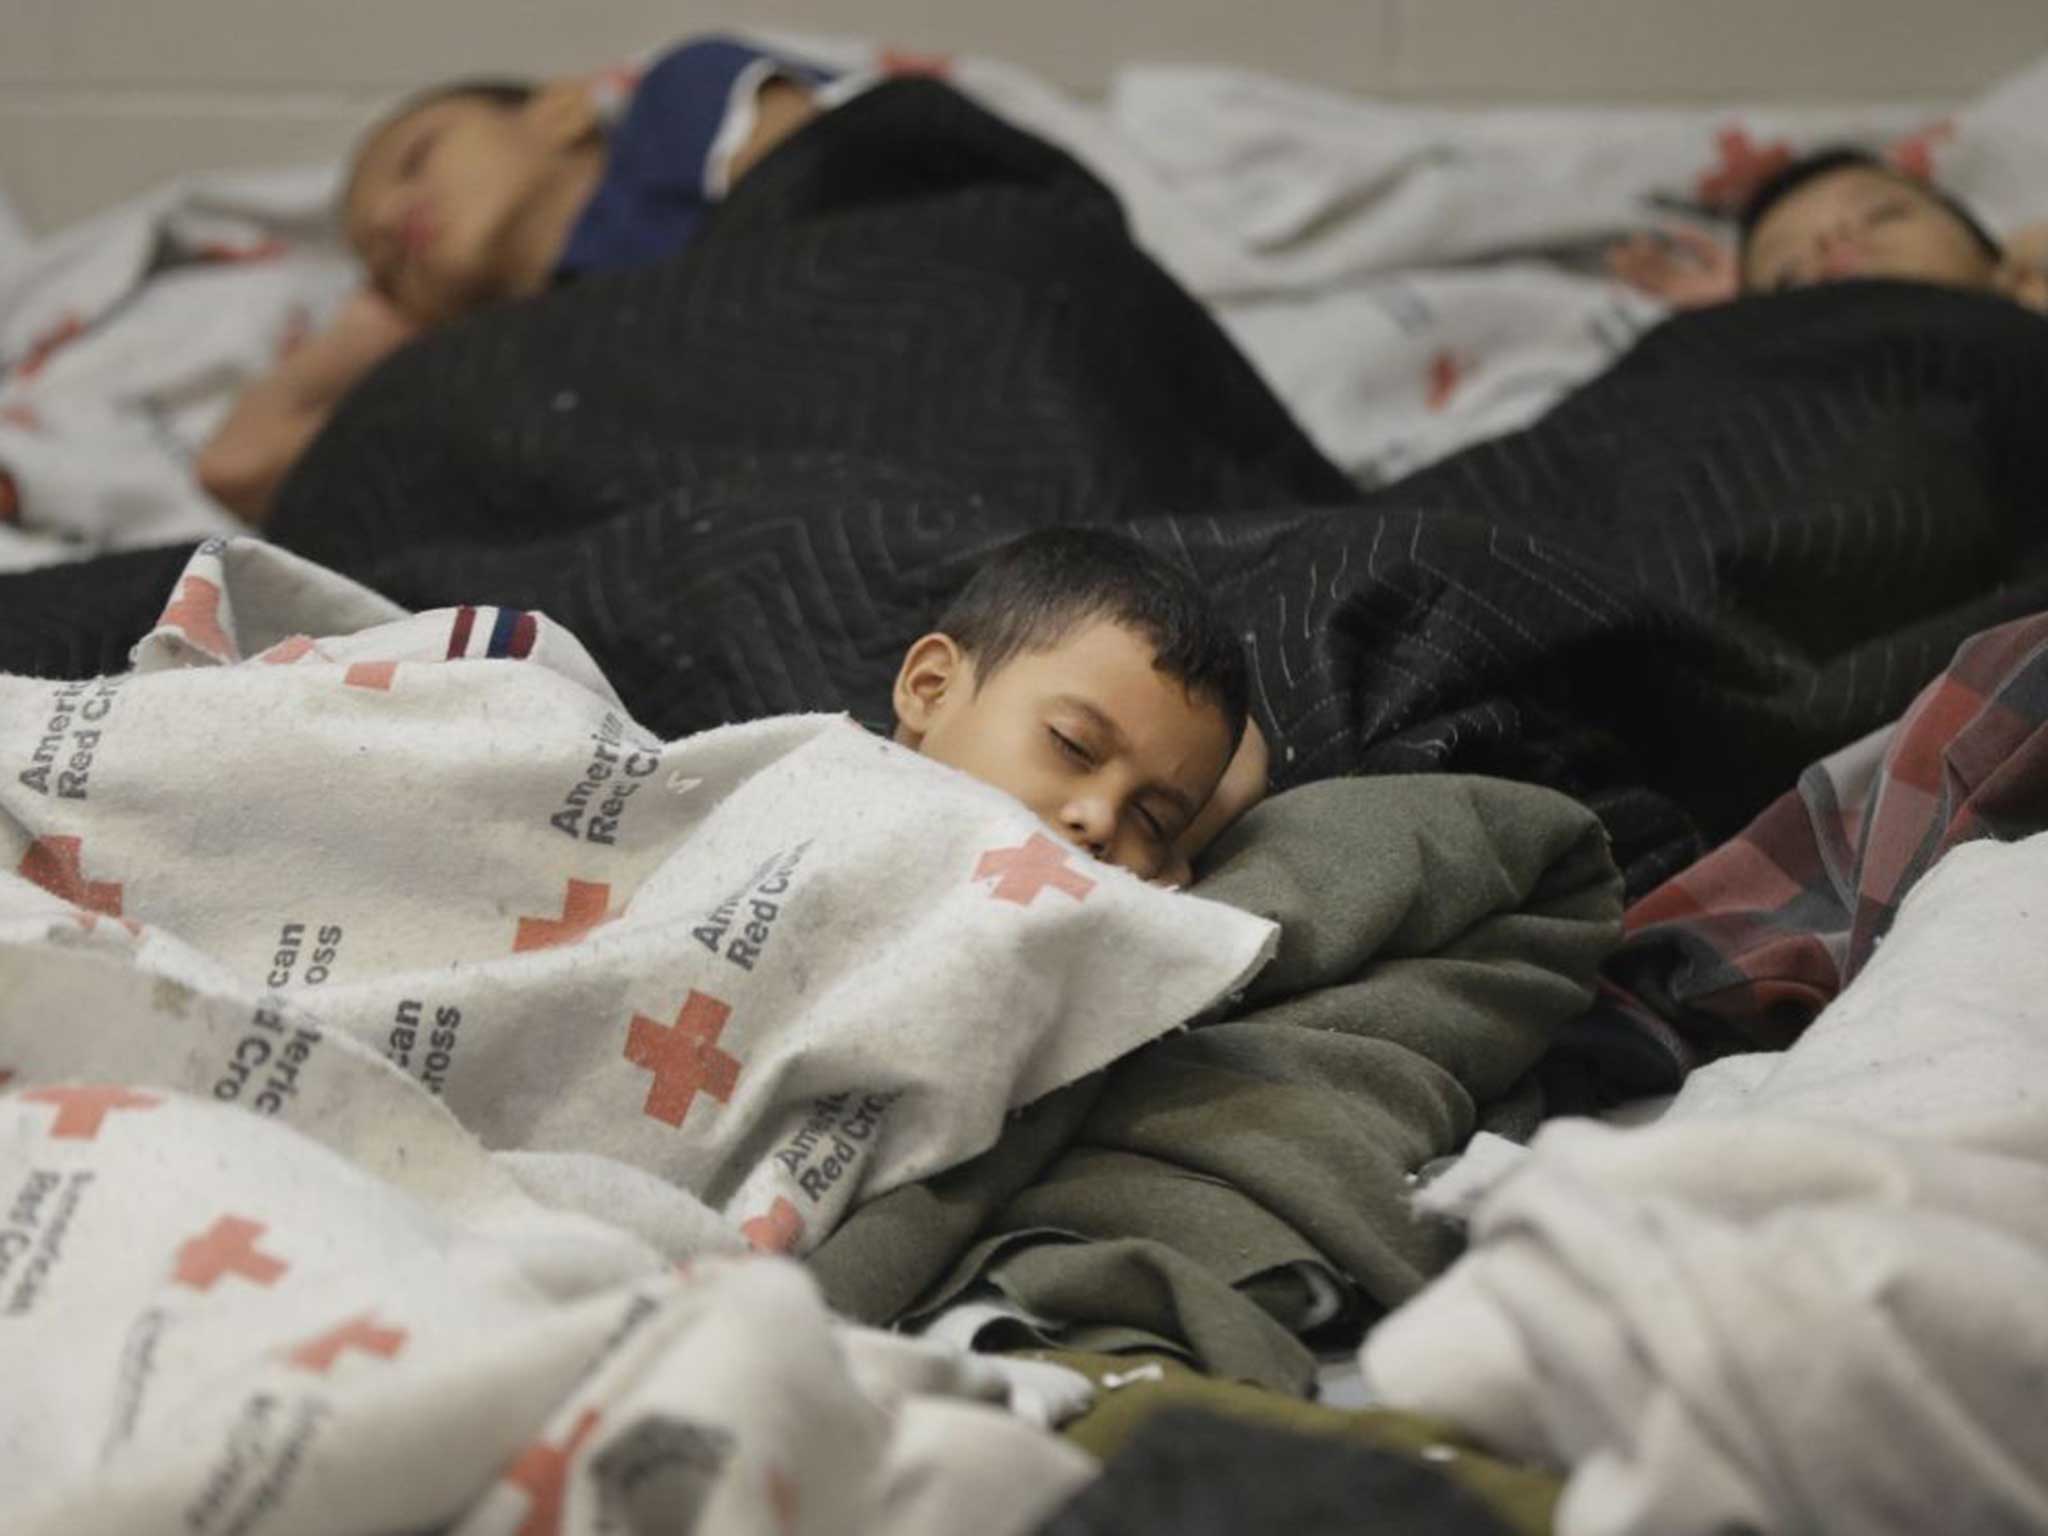 Left in limbo: Refugee children in a processing centre in Brownsville, Texas